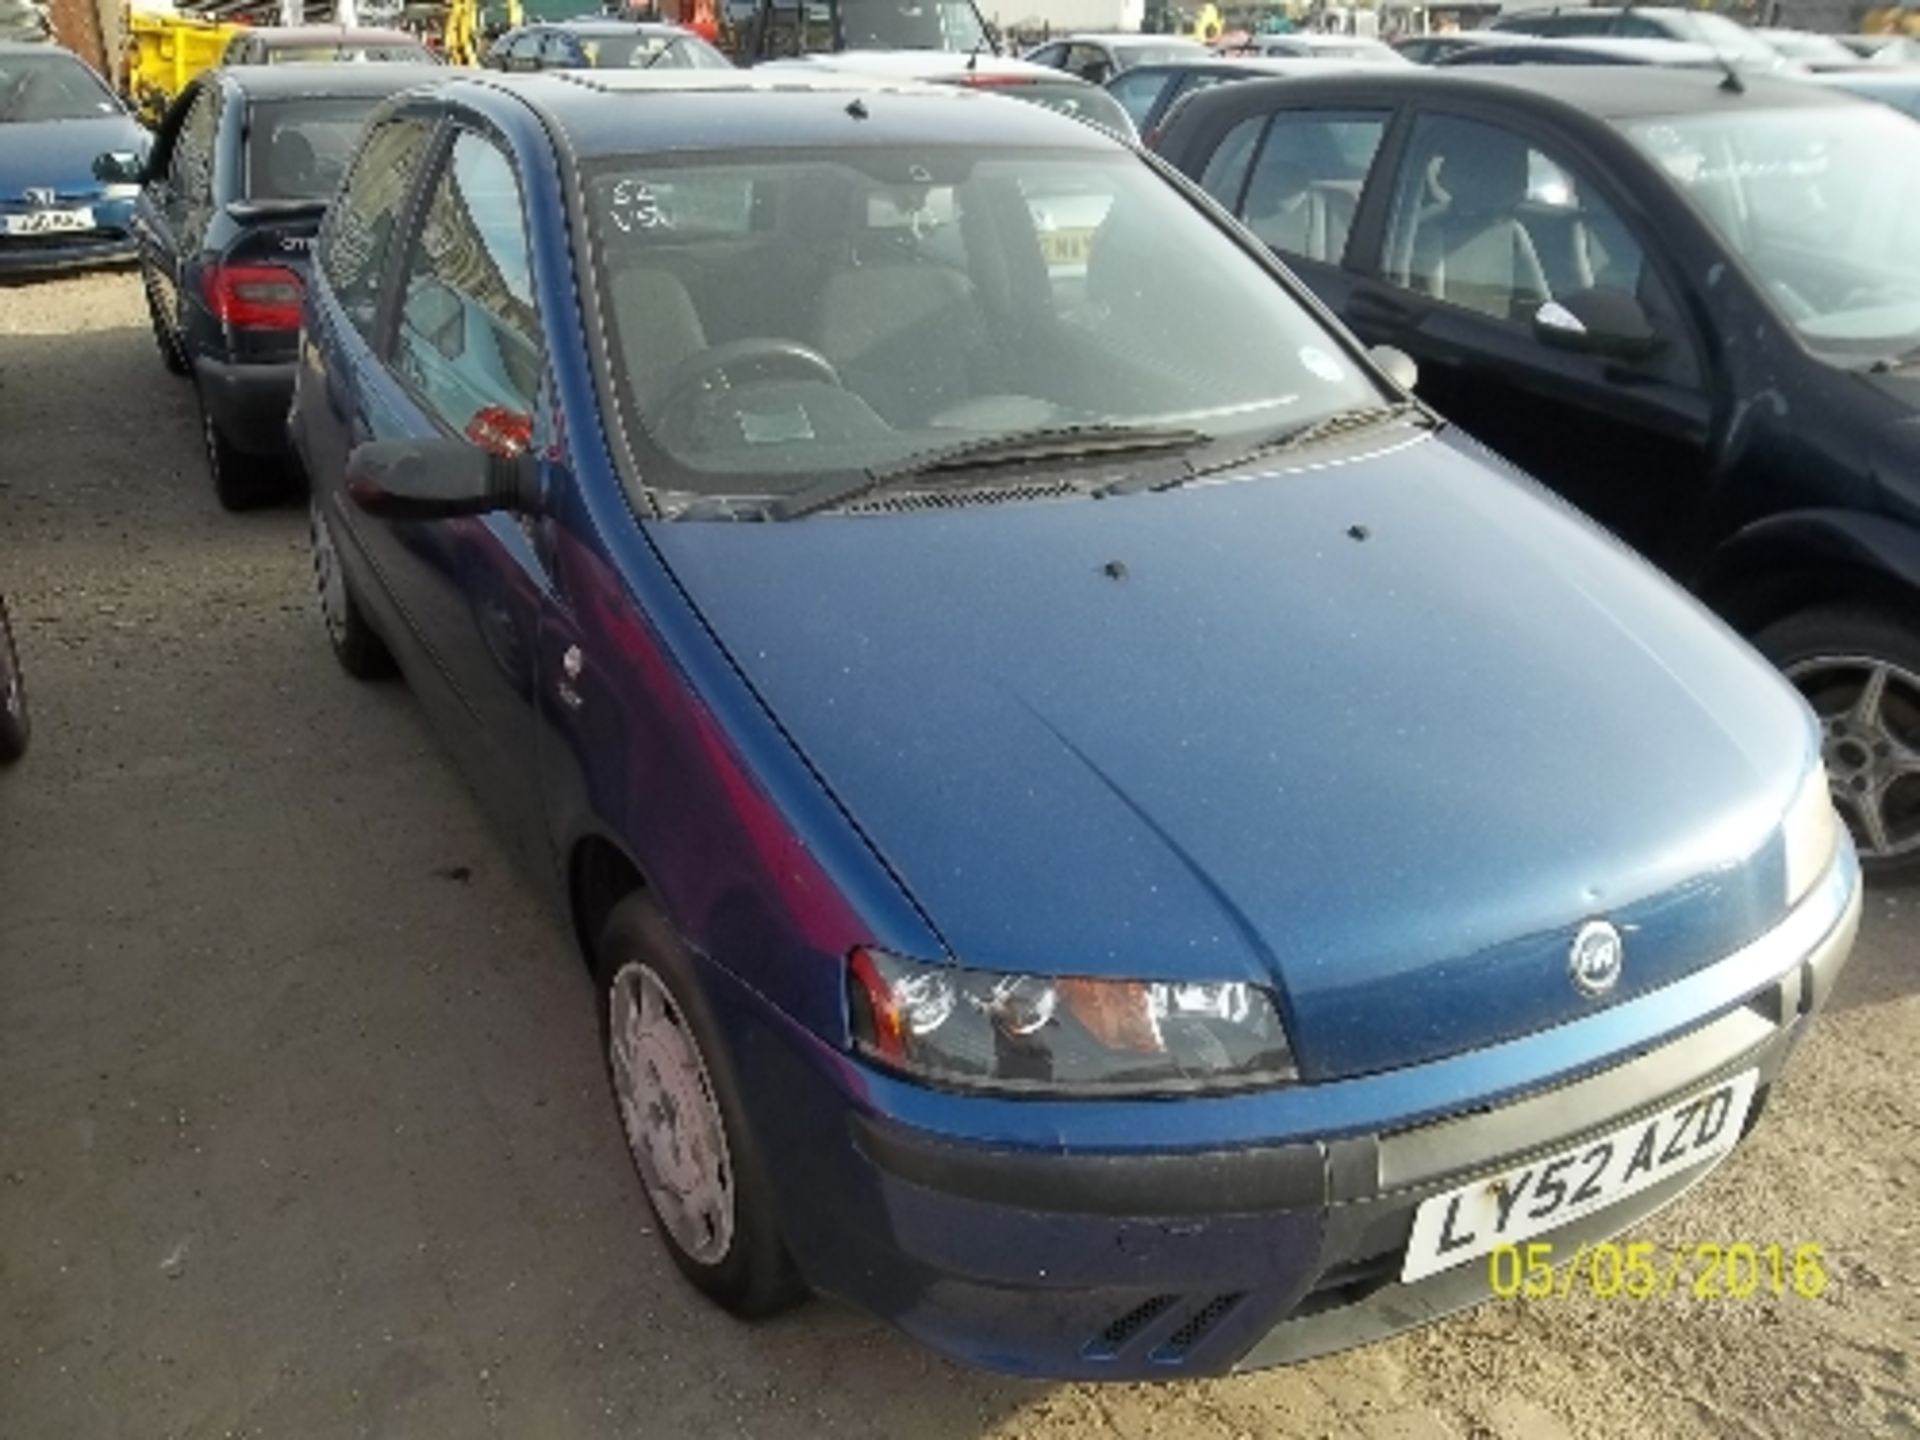 Fiat Punto Active Sport - LY52 AZD Date of Registration: 06.11.2002 1242cc, petrol, manual, blue - Image 2 of 4